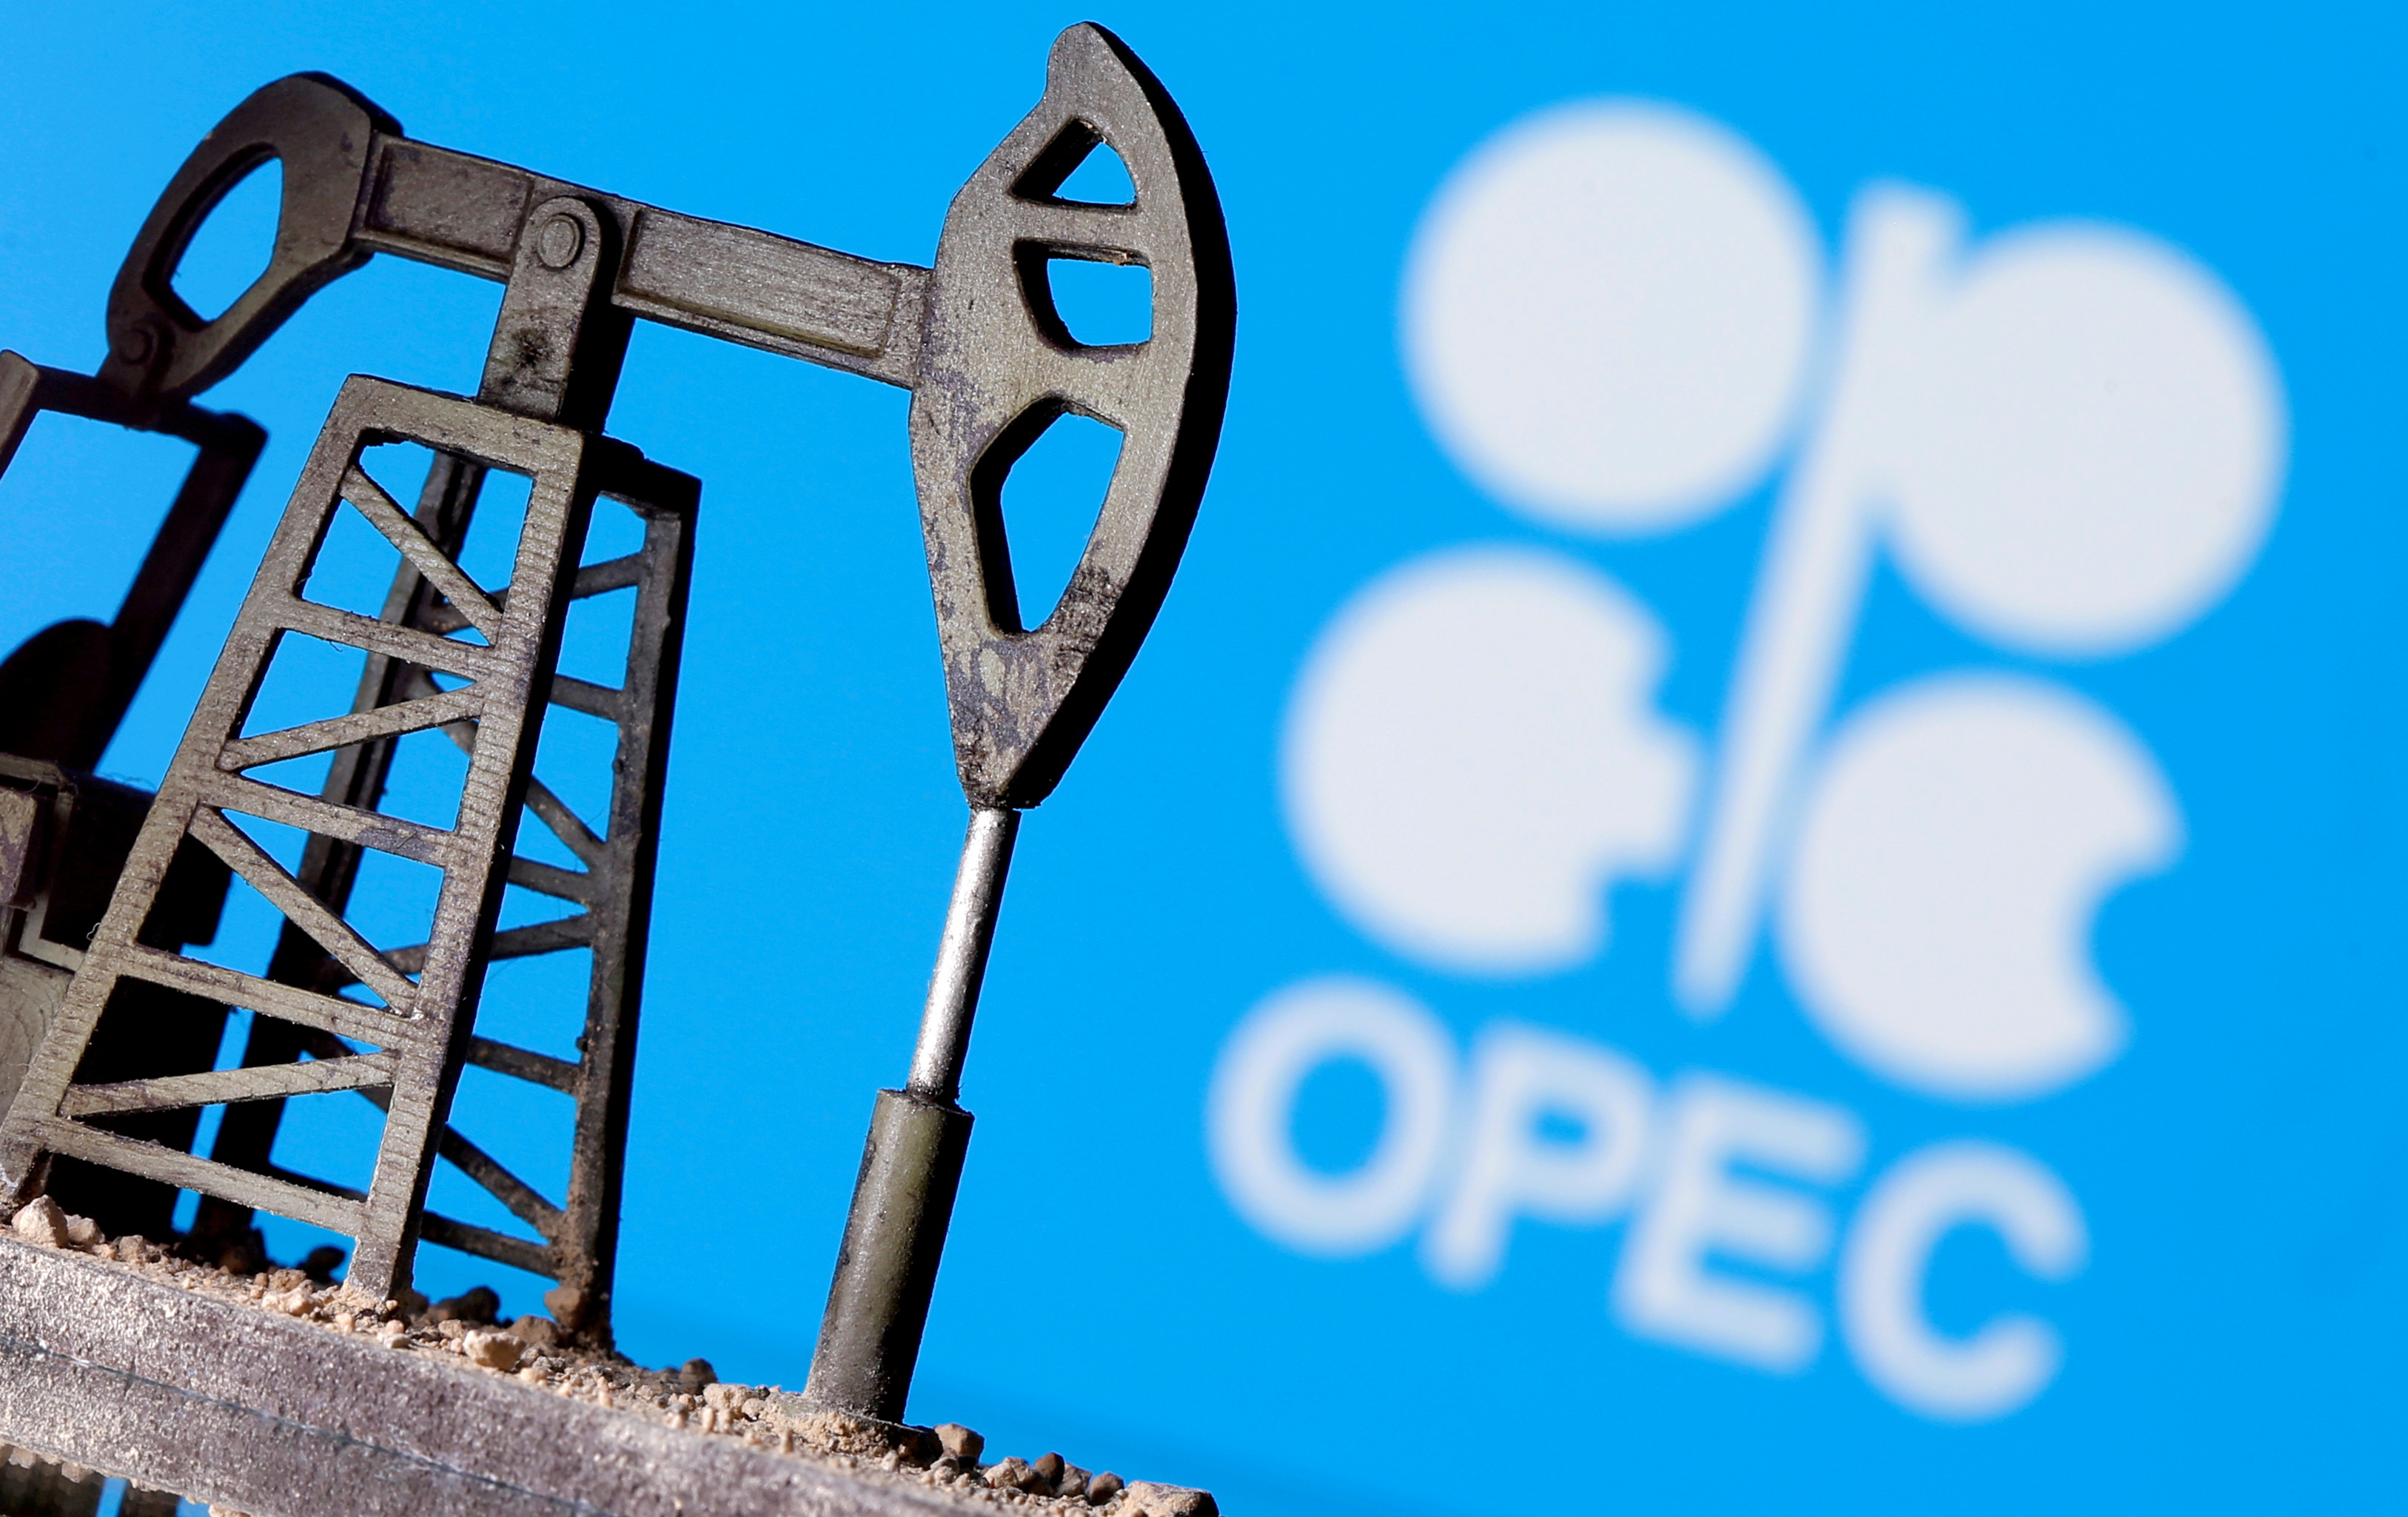 A 3D-printed oil pump jack is seen in front of displayed OPEC logo in this illustration picture, April 14, 2020. REUTERS/Dado Ruvic/Illustration//File Photo